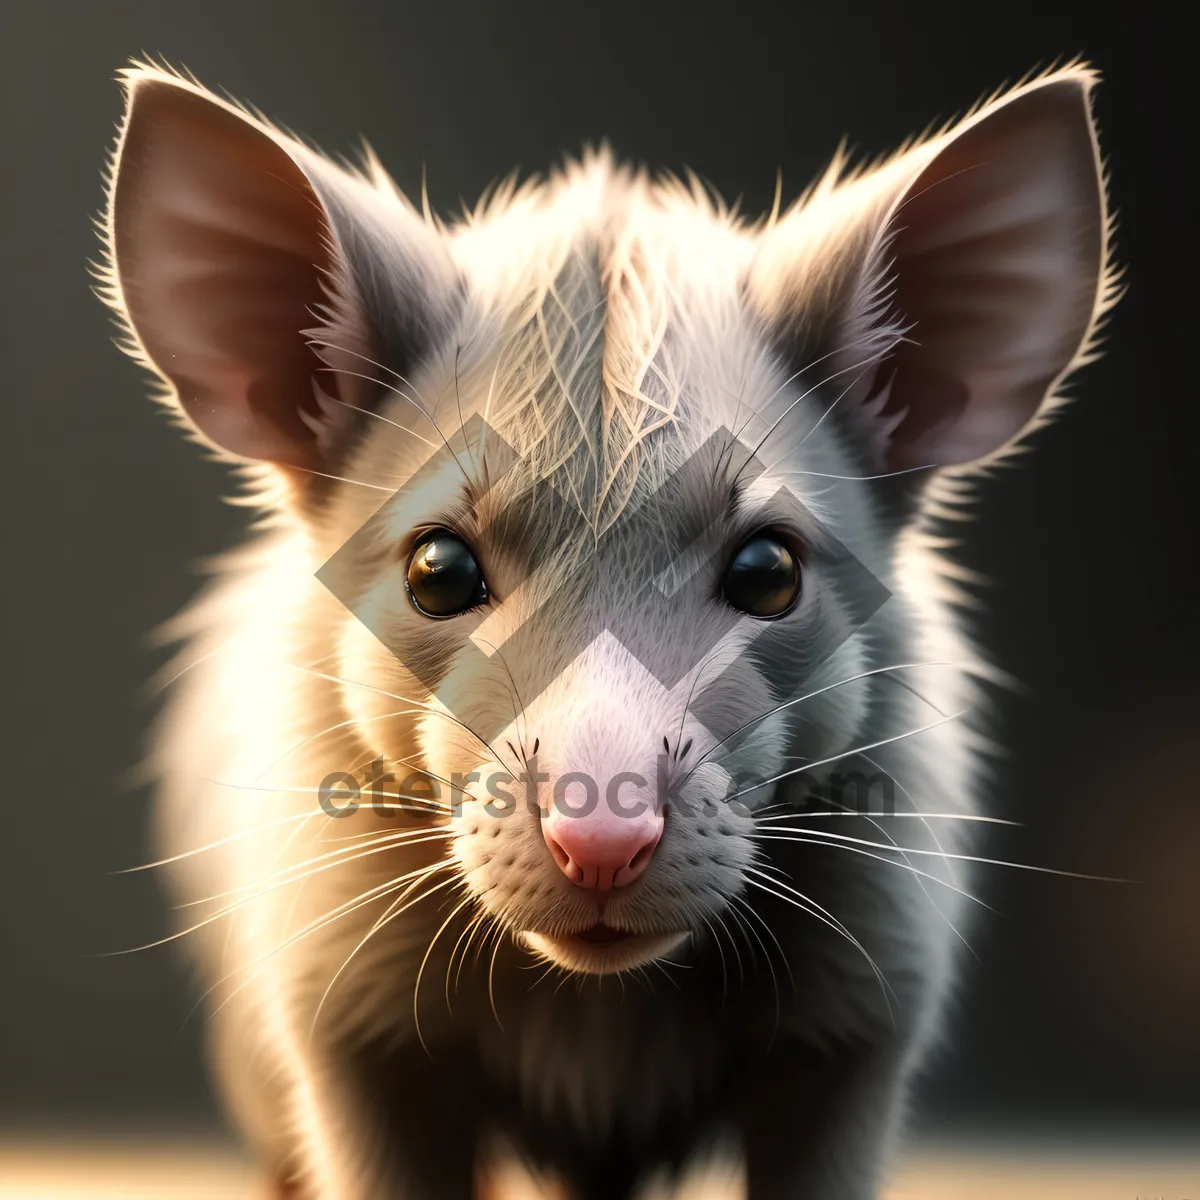 Picture of Furry Friend's Adorable Gray Portrait with Whiskers